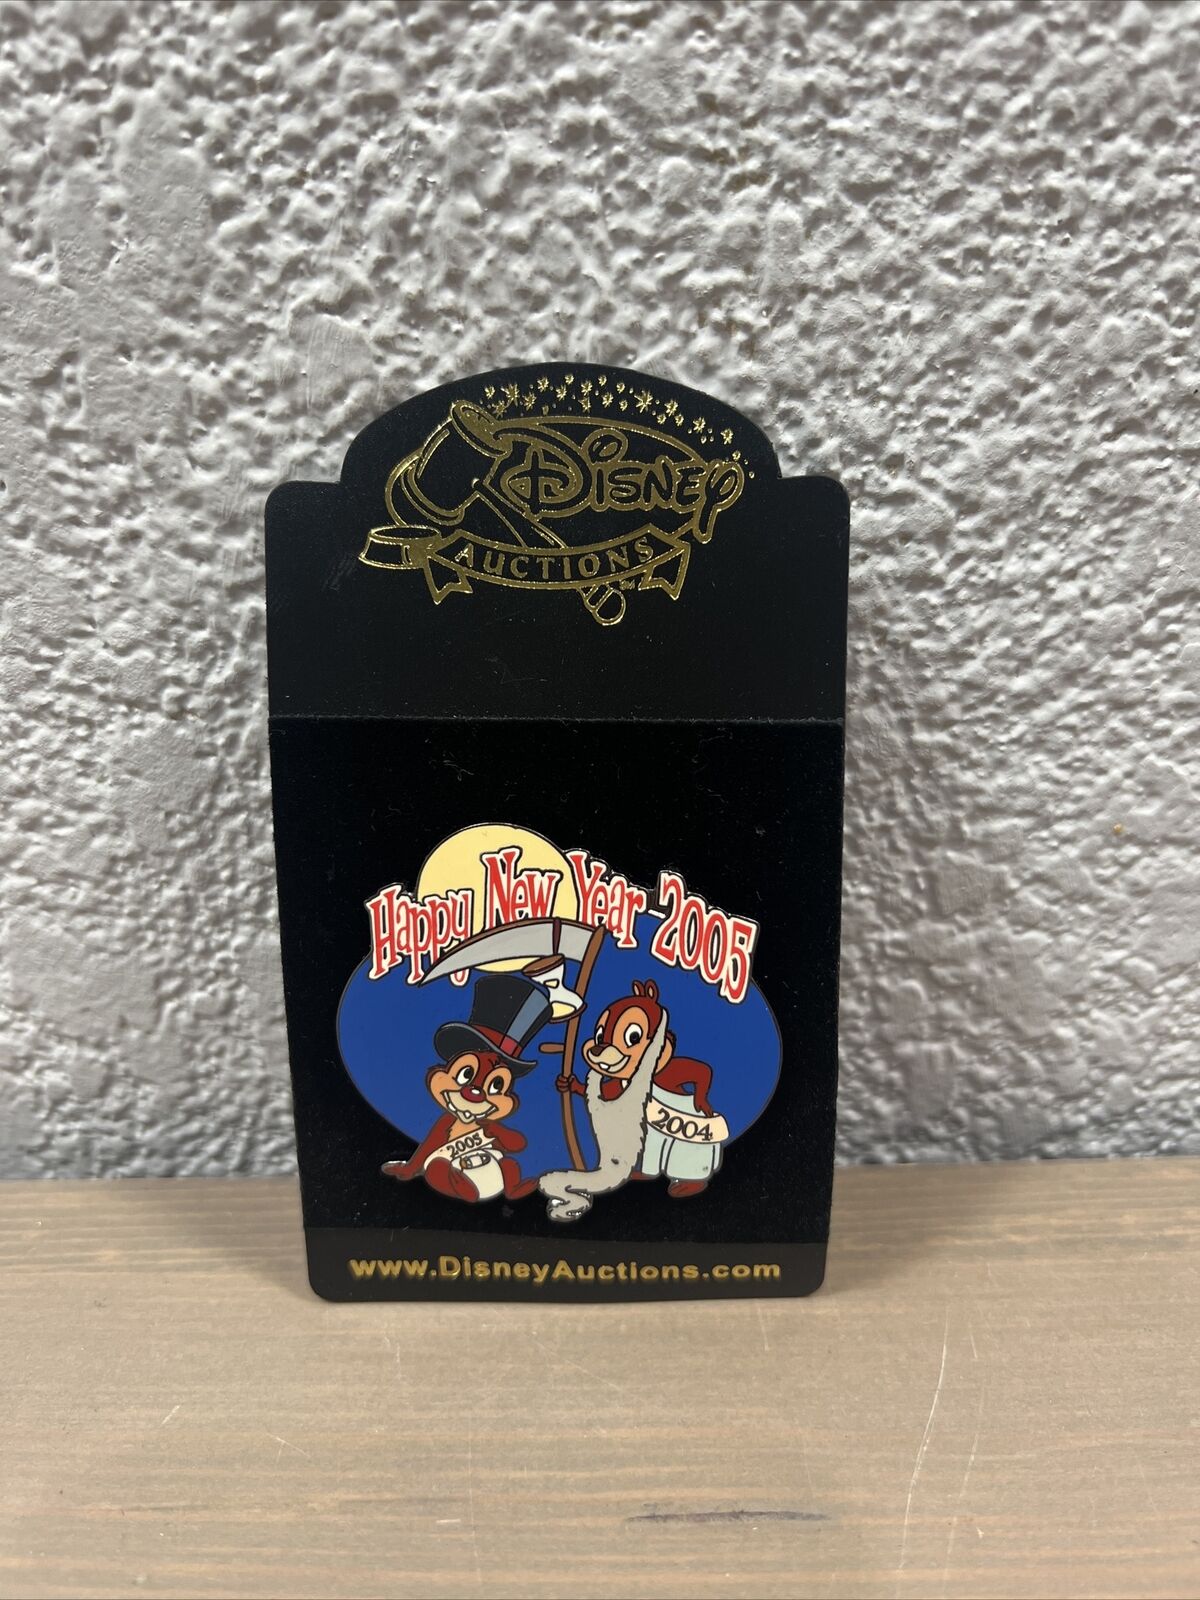 DISNEY AUCTIONS EXCLUSIVE CHIP AND DALE HAPPY NEW YEAR 2005 LE 250 TRADING PIN 